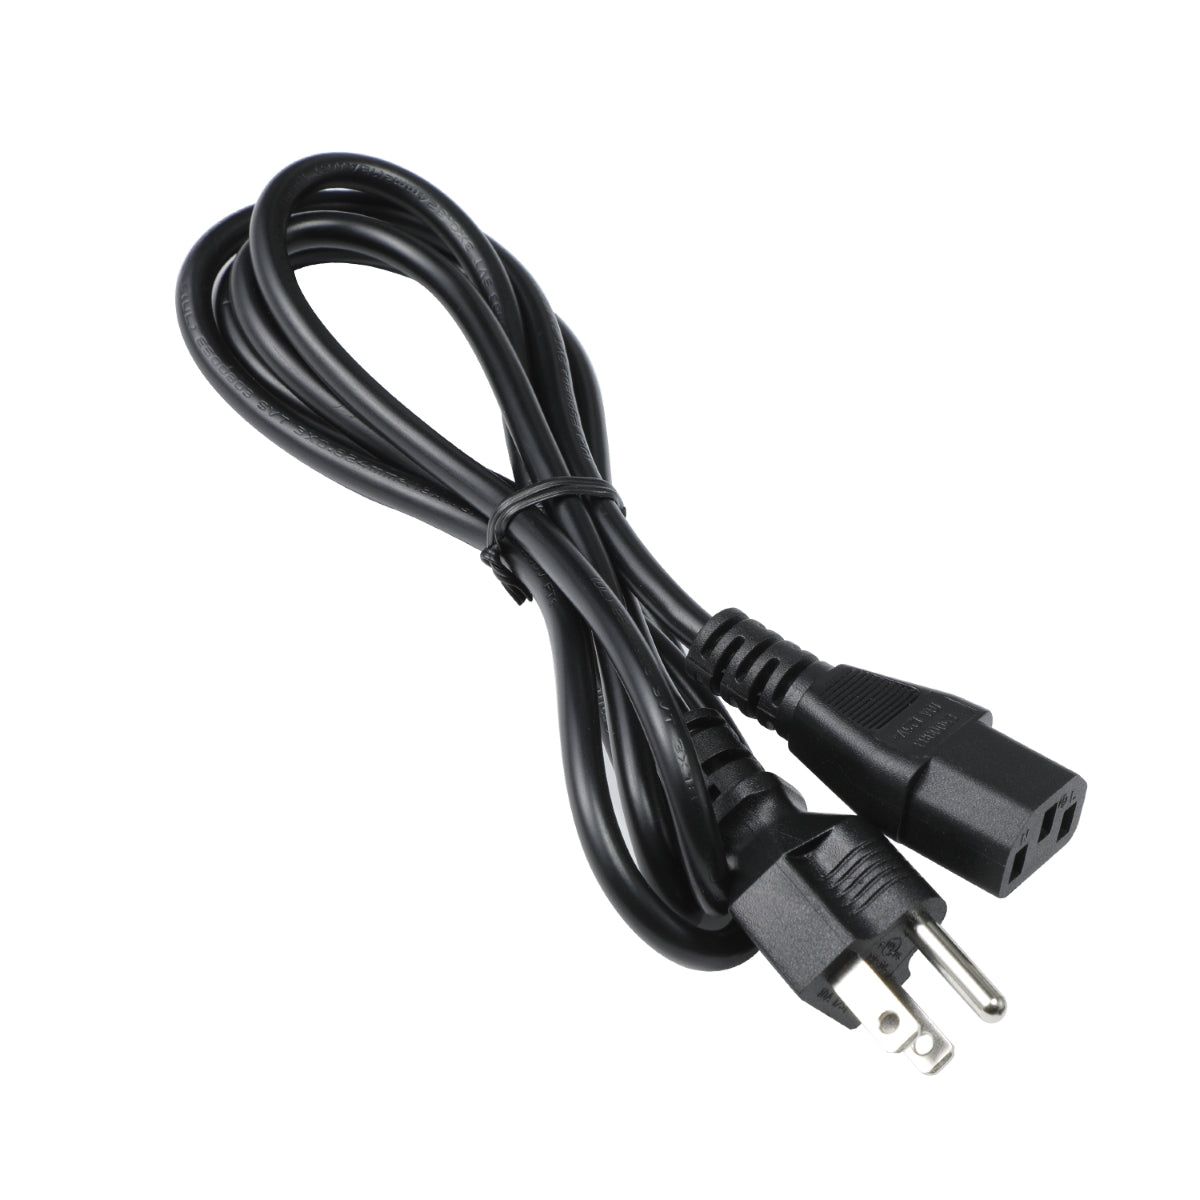 Power Cord for HP Pavilion 550-040 Computer.